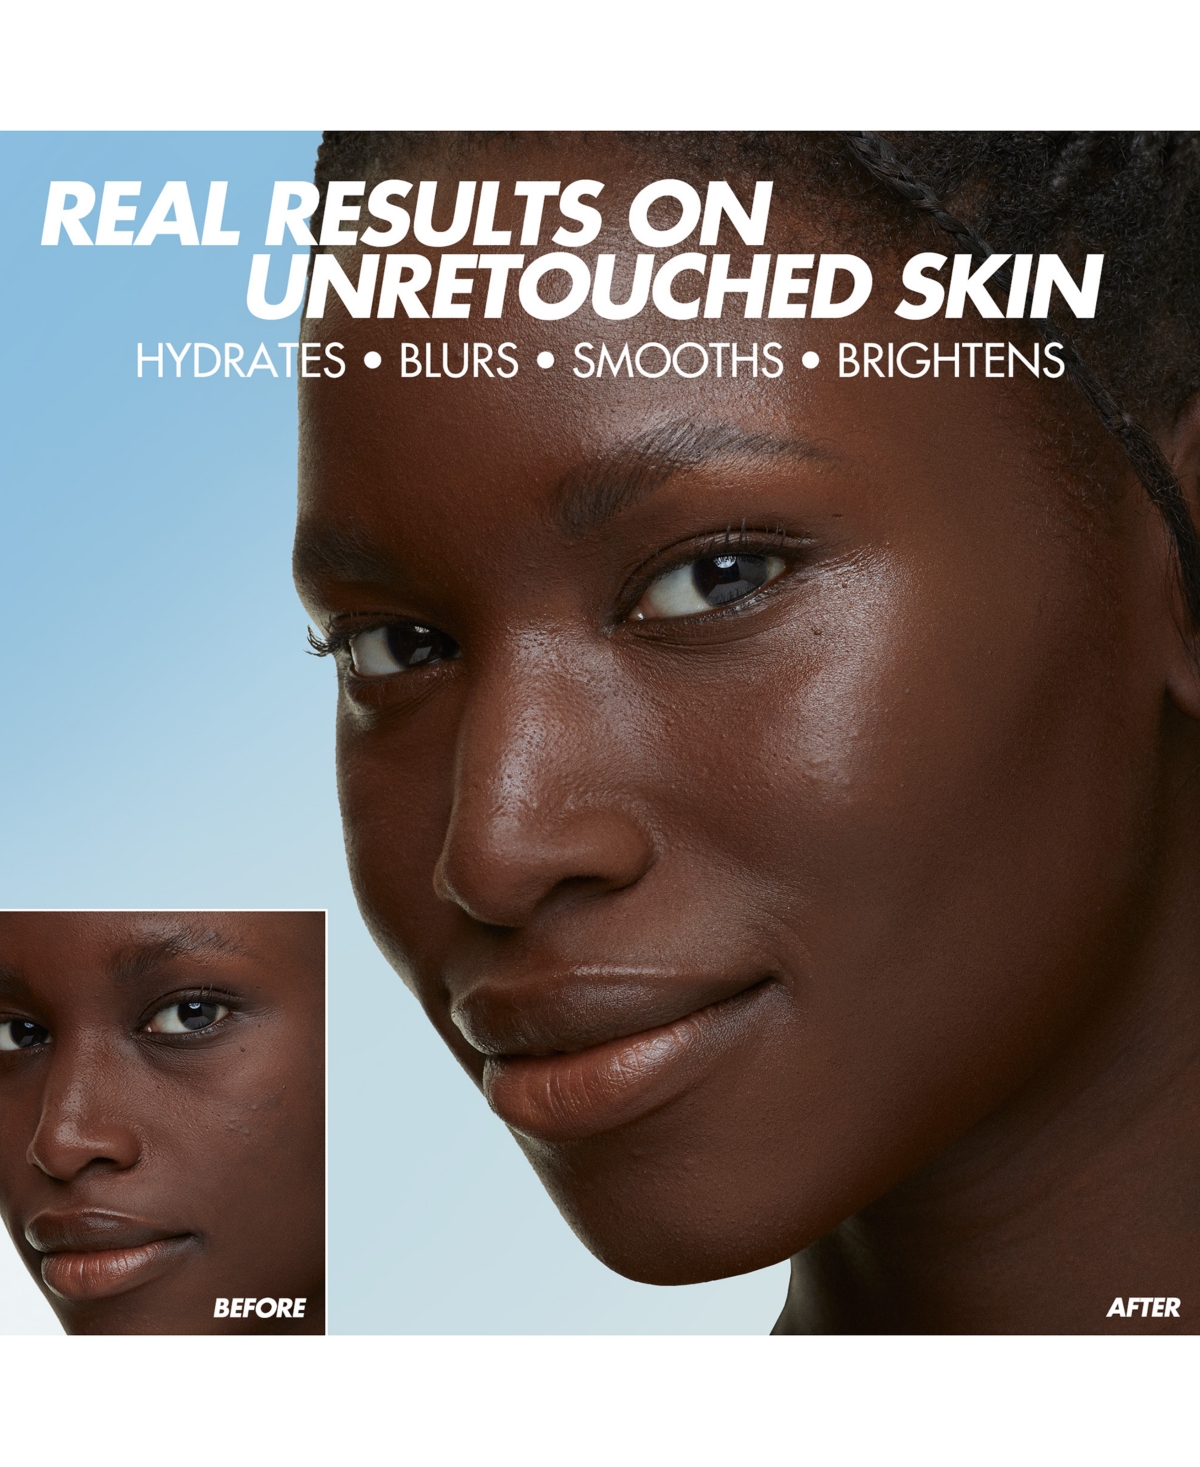 Shop Make Up For Ever Hd Skin Hydra Glow Skincare Foundation With Hyaluronic Acid In R - Cool Mapleâ - For Tan Skin With Ros